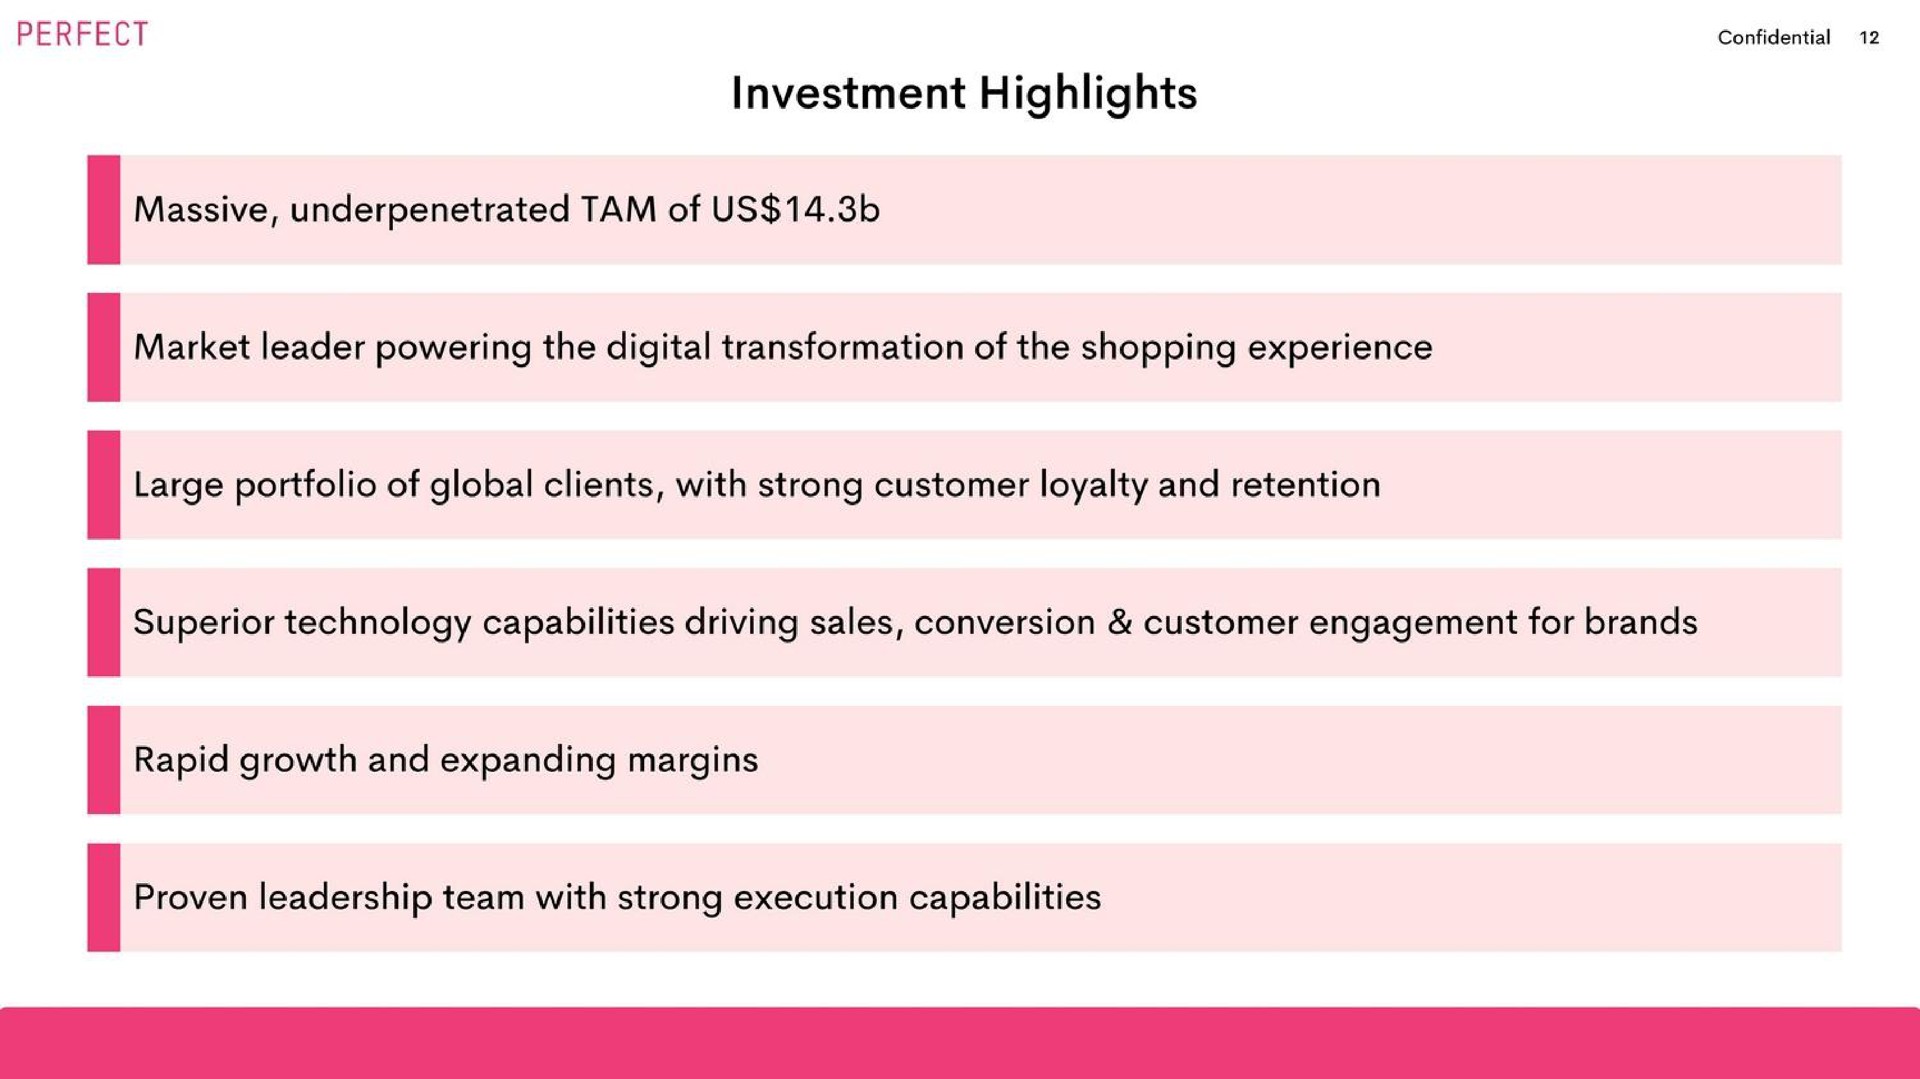 investment highlights massive tam of us market leader powering the digital transformation of the shopping experience large portfolio of global clients with strong customer loyalty and retention superior technology capabilities driving sales conversion customer engagement for brands rapid growth and expanding margins proven leadership team with strong execution capabilities | Perfect